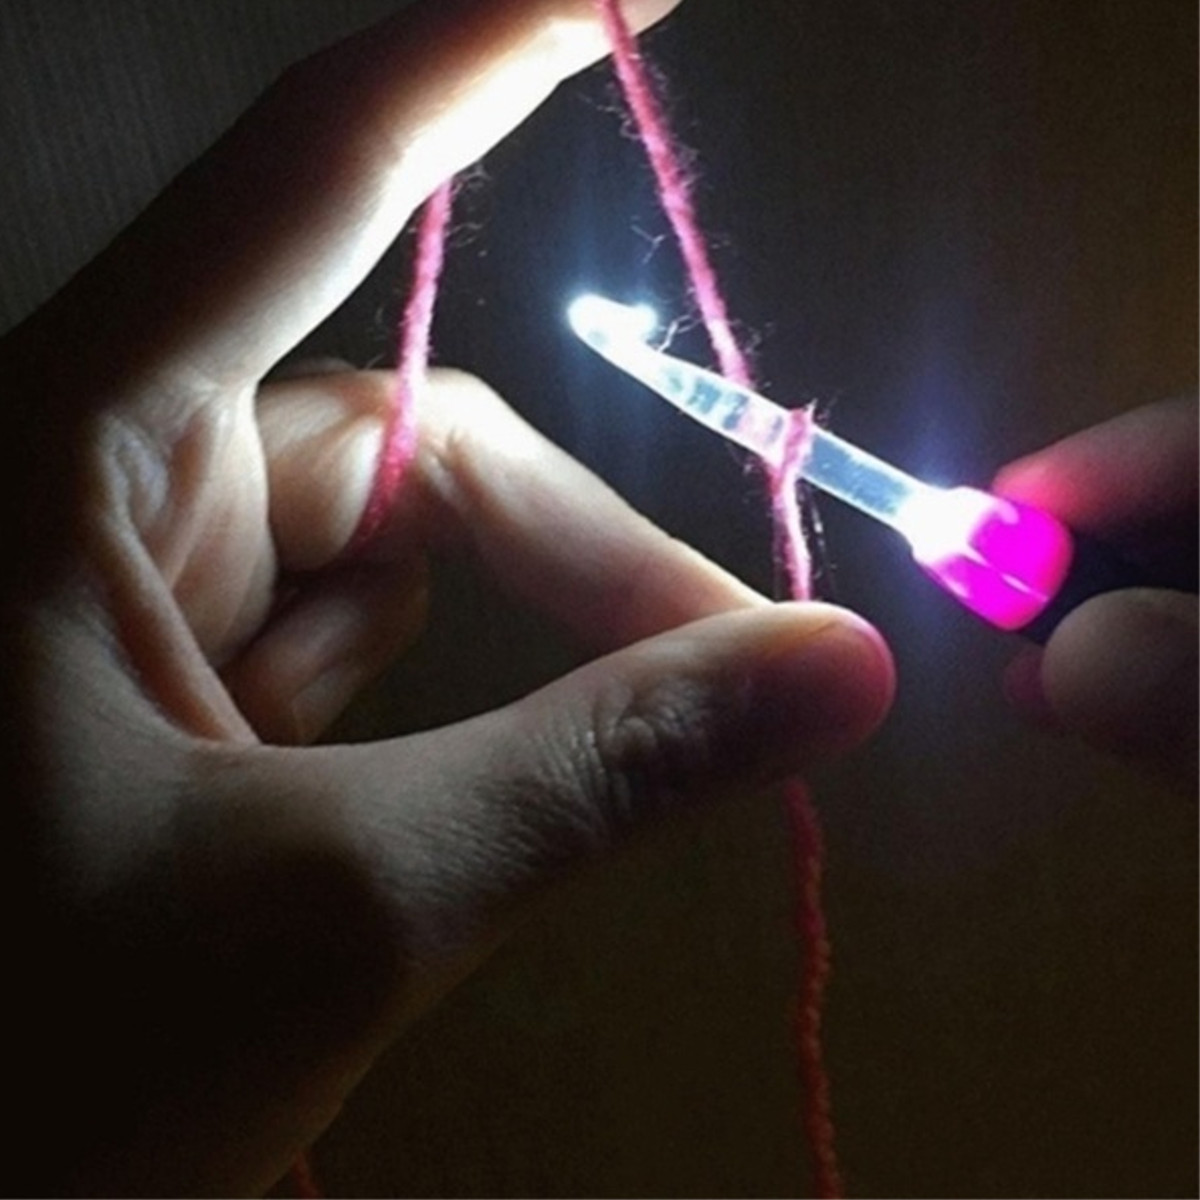 11-In-1-USB-LED-Light-Knitted-Crochet-Kit-DIY-Weaving-Tool-Kits-Sweater-Sewing-Accessories-DIY-LED-F-1586130-3